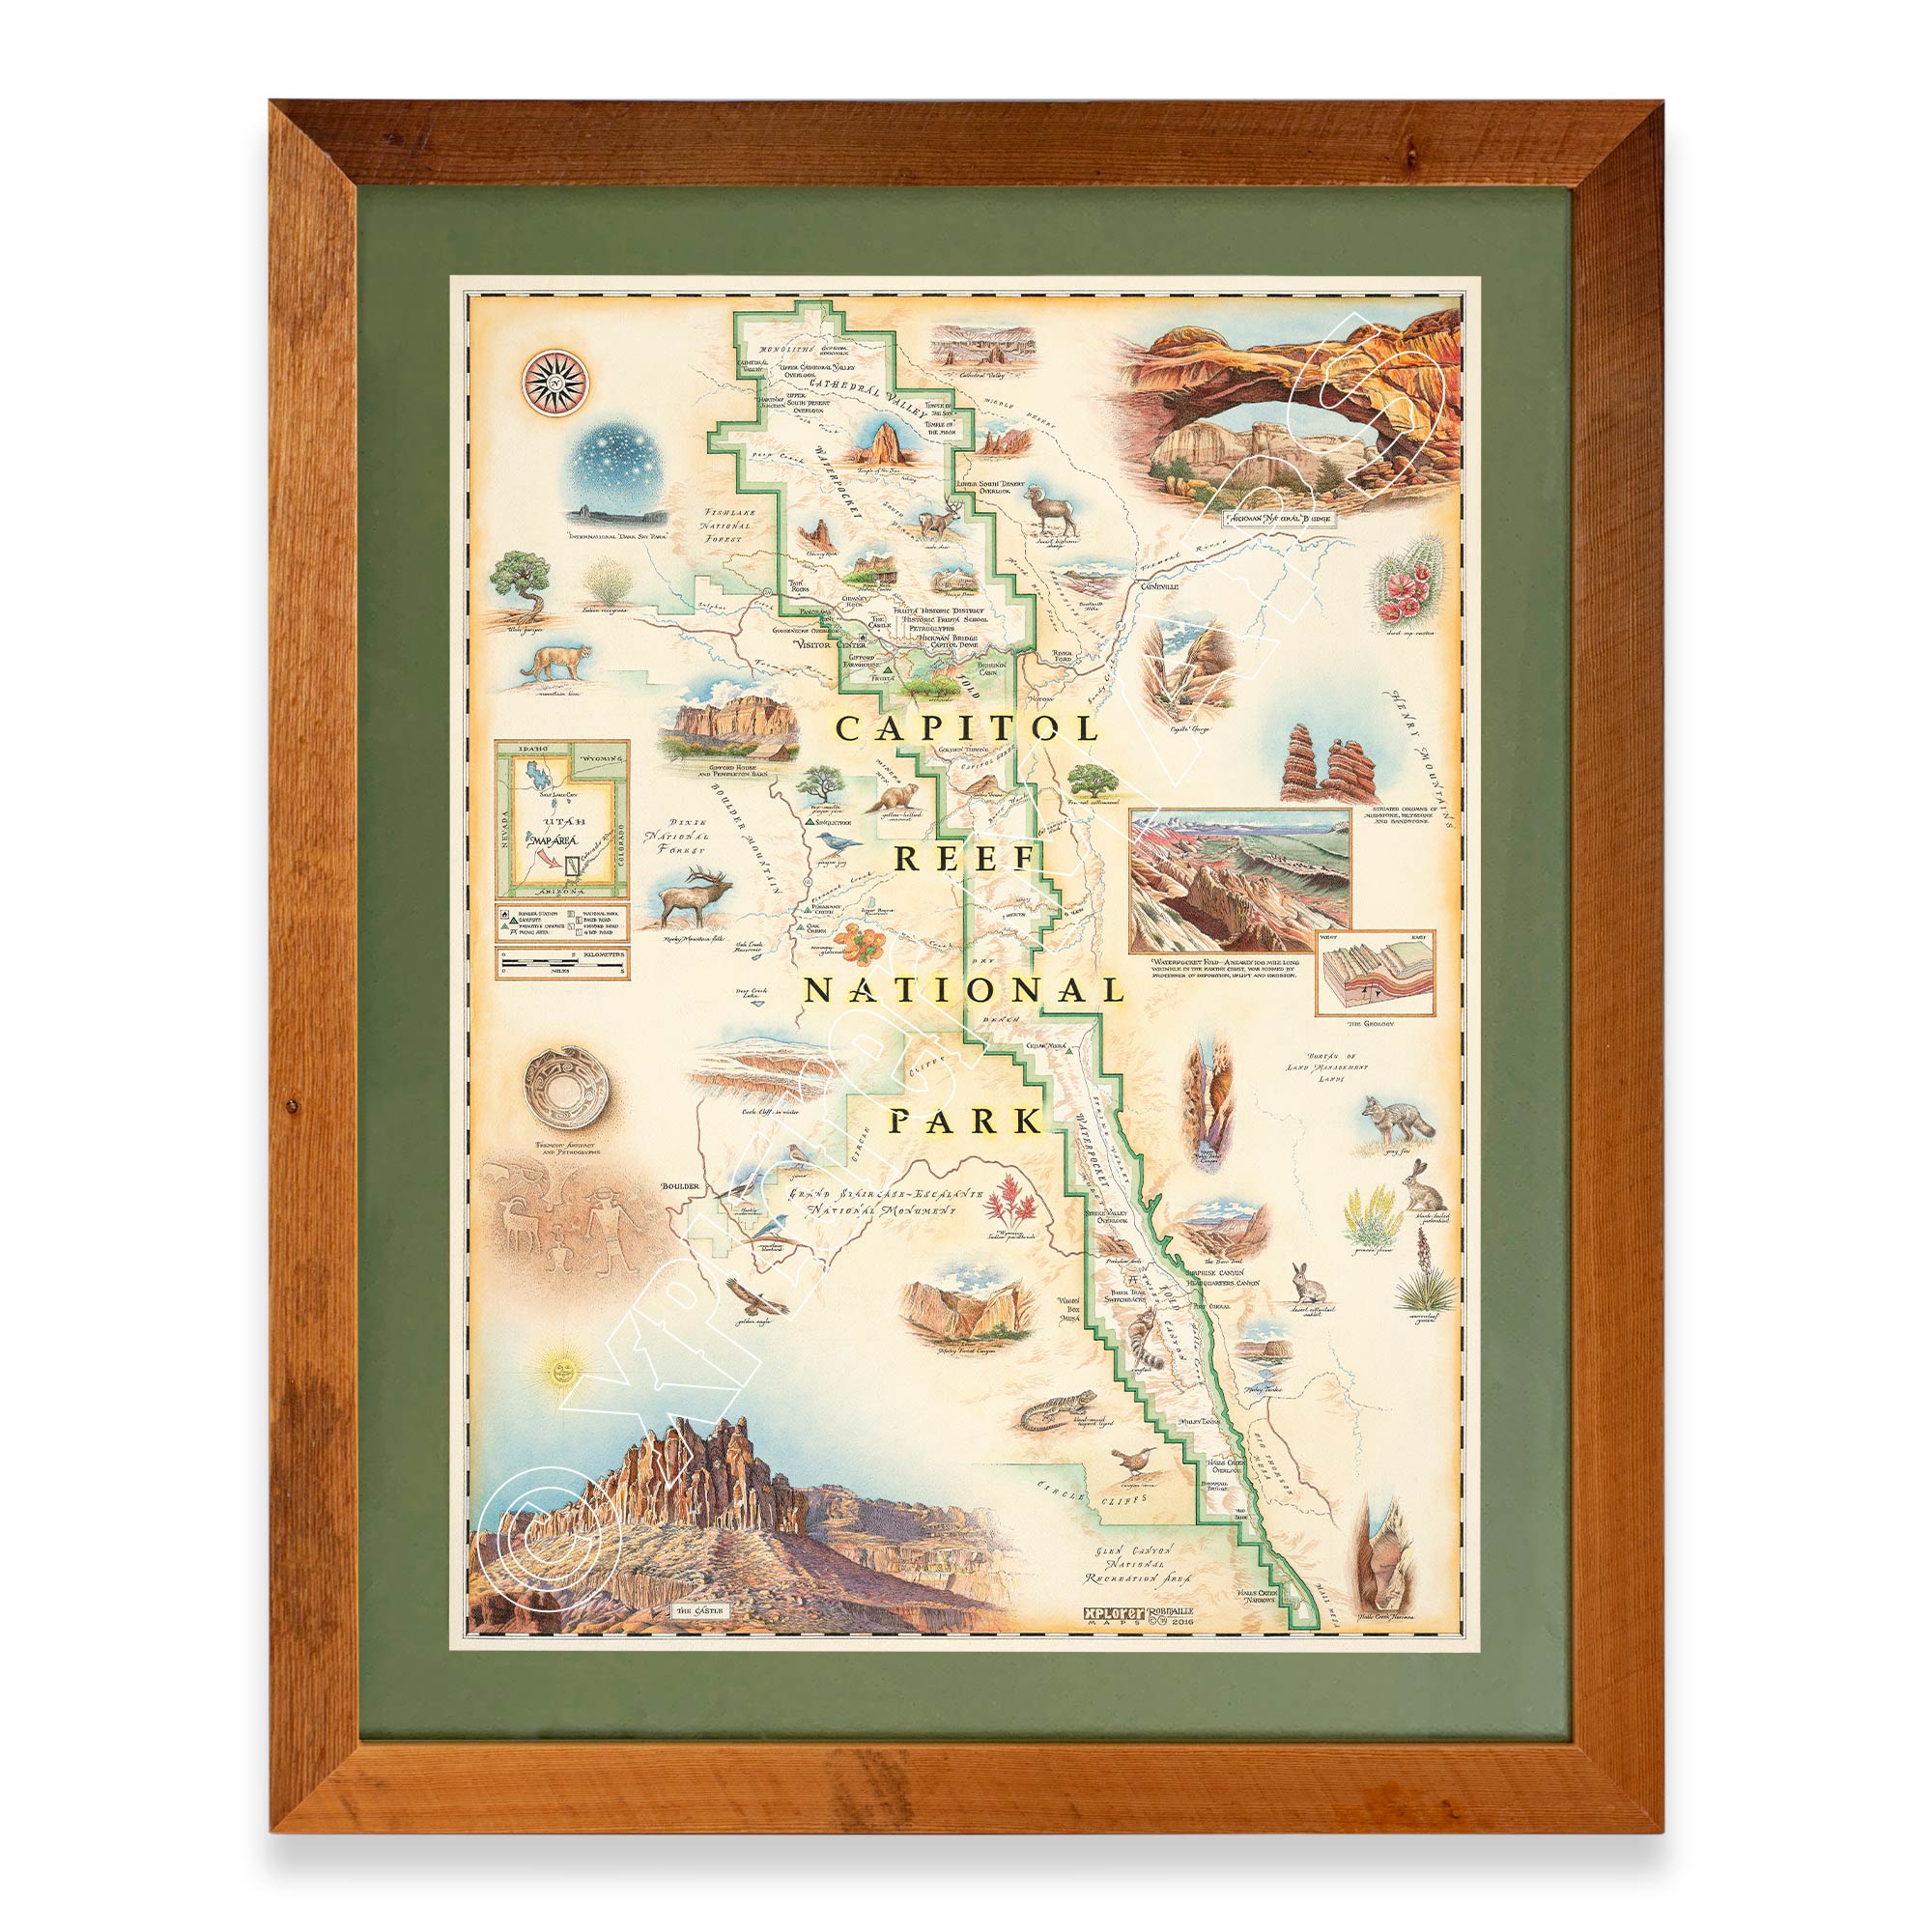 Utah's Capitol Reef National Park hand-drawn map in a Montana hand-scraped pine wood frame with green mat.